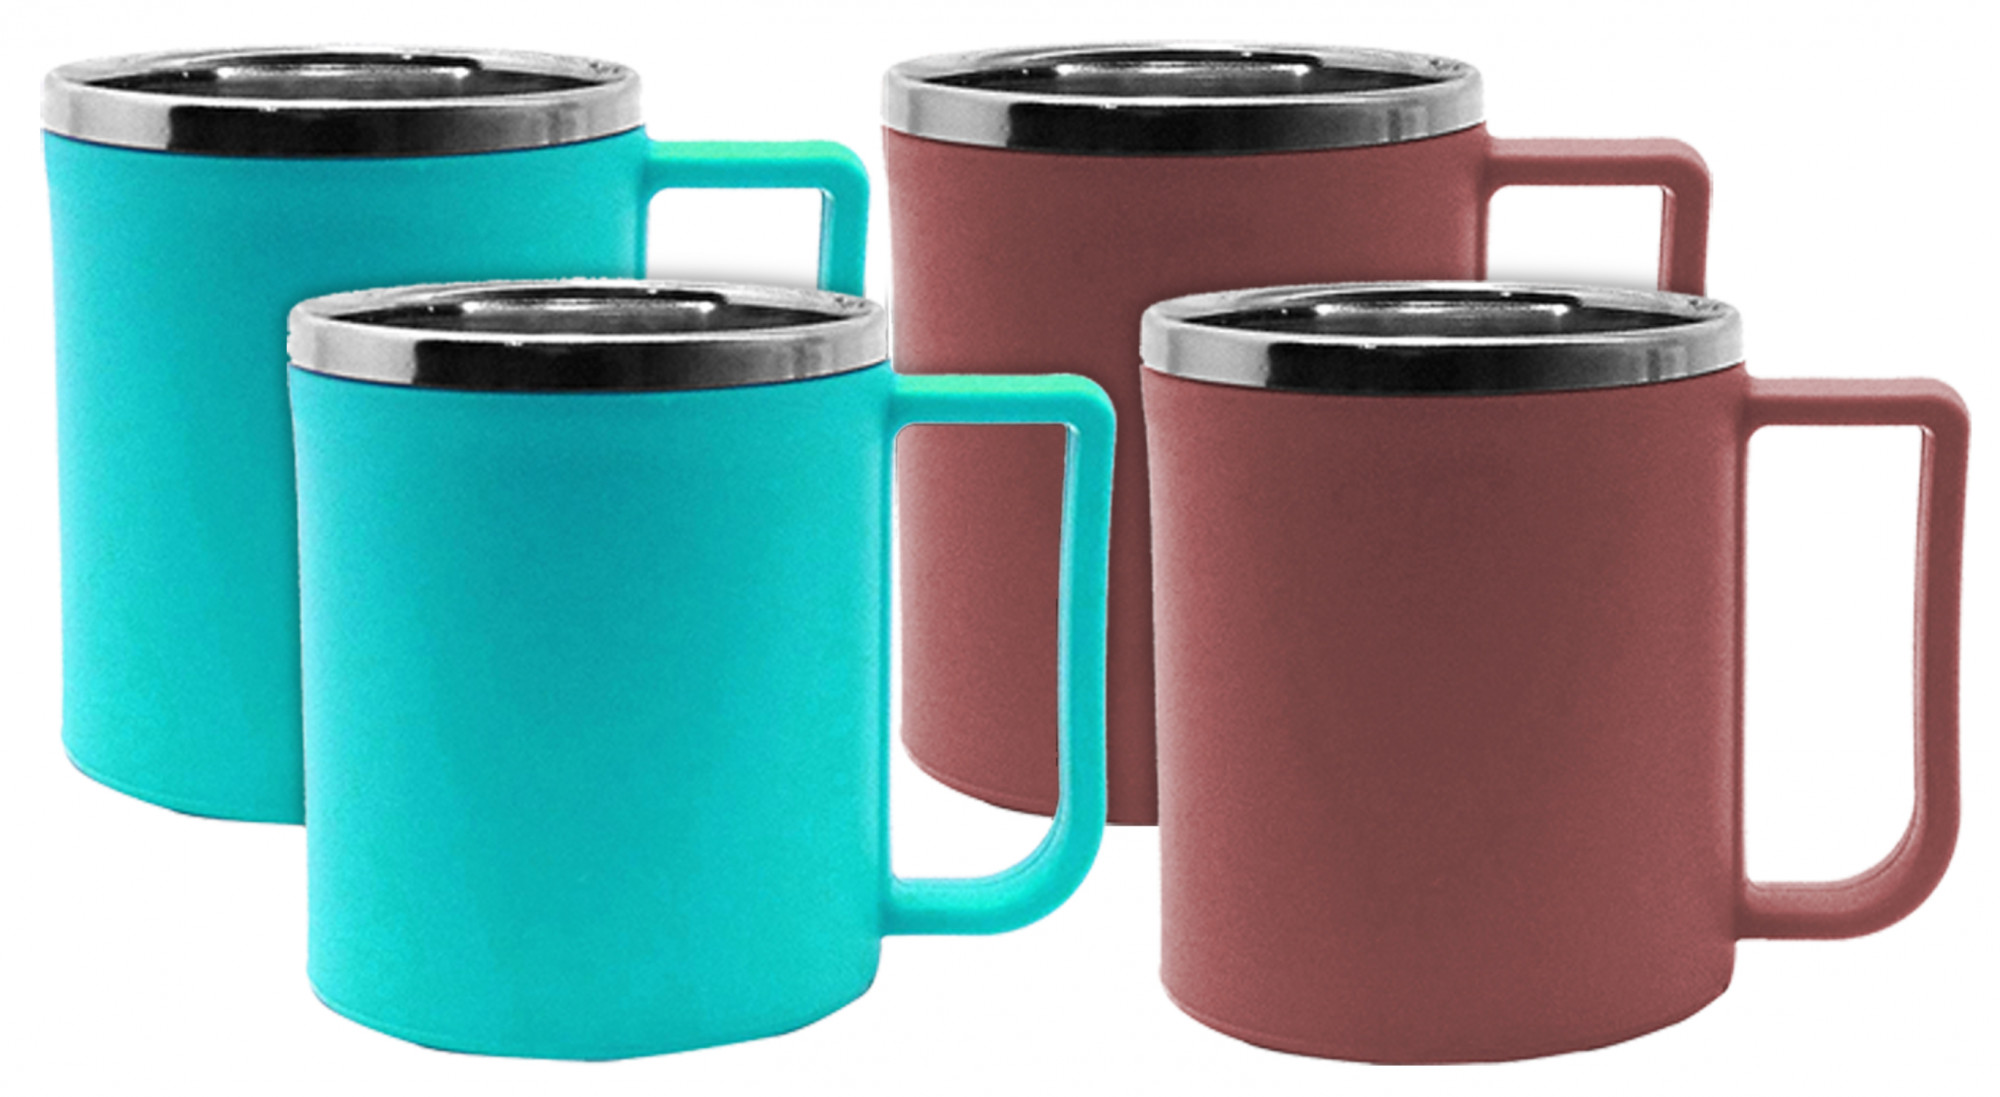 Kuber Industries Plastic Steel Cups for Coffee Tea Cocoa, Camping Mugs with Handle, Portable & Easy Clean,(Green & Brown)